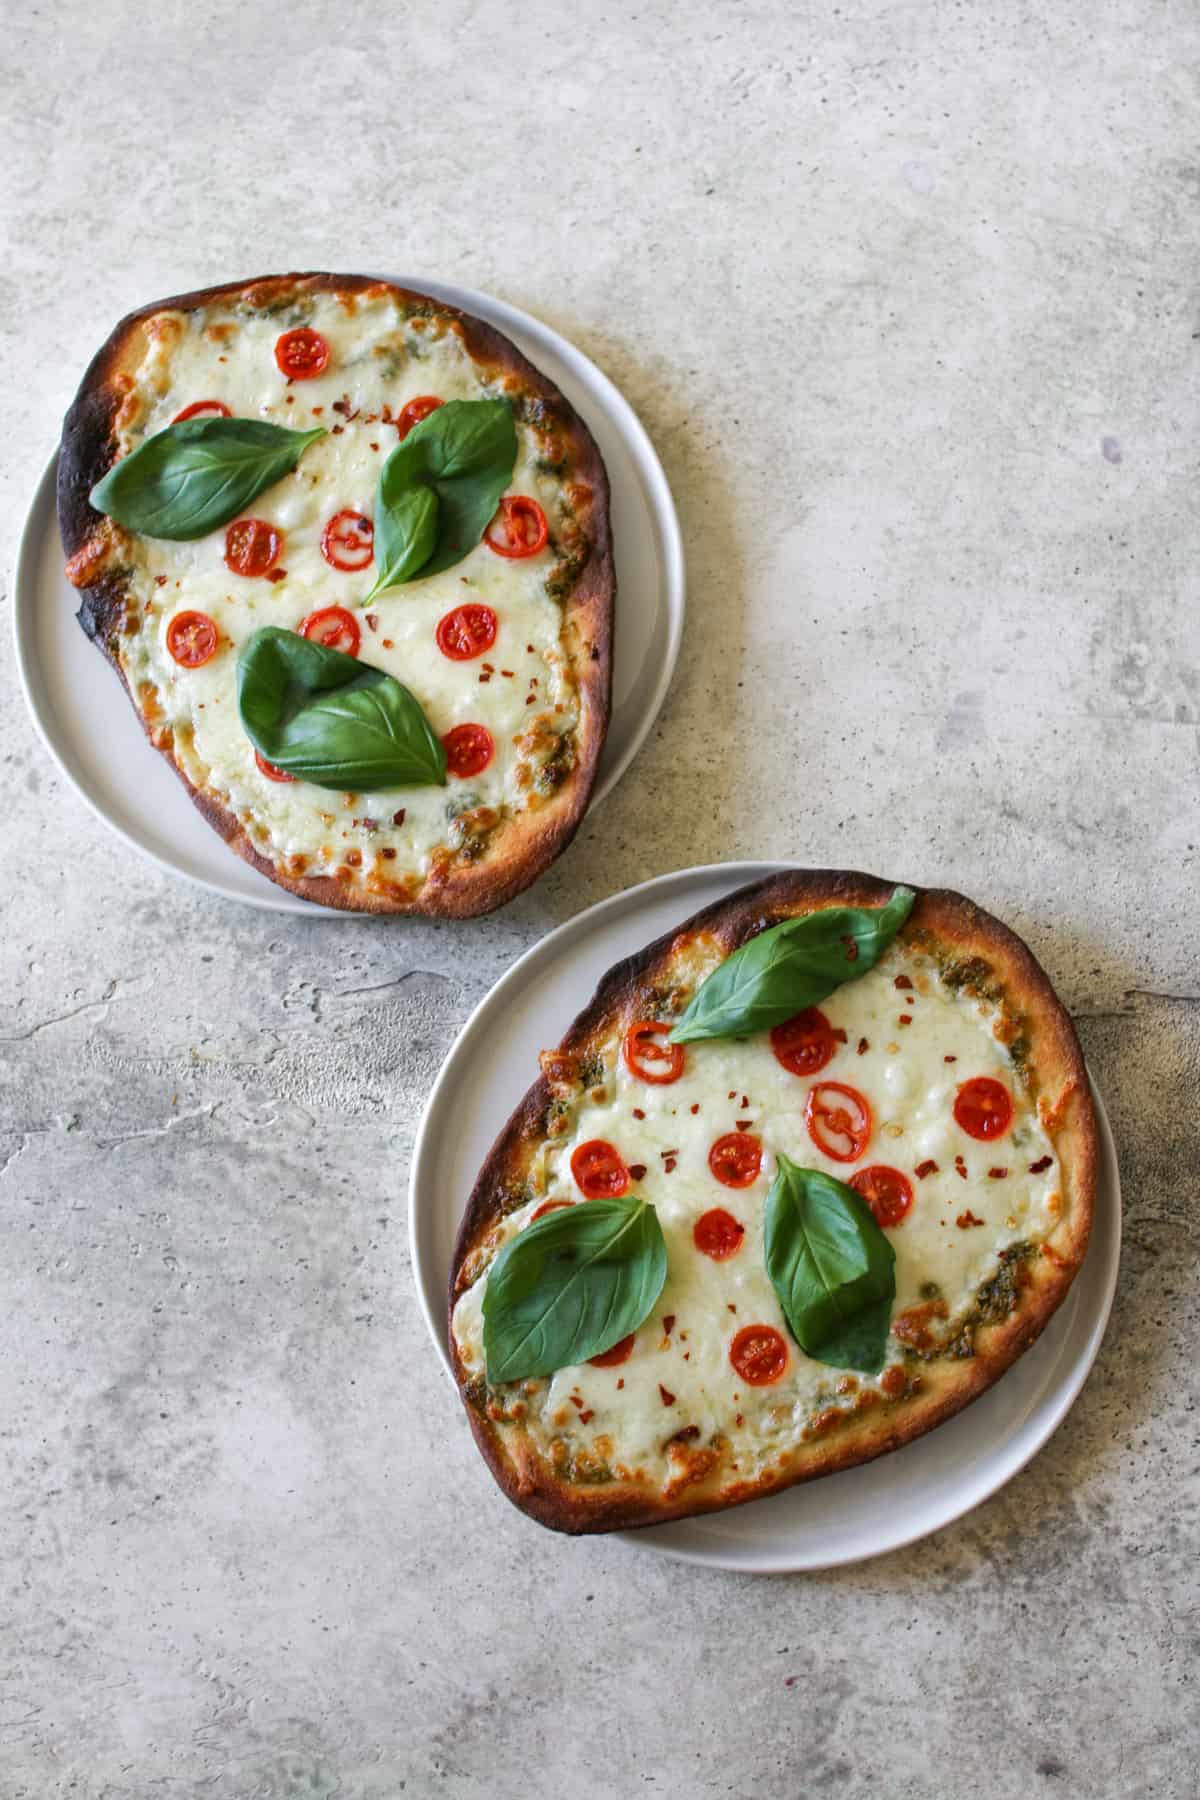 Two Pesto Naan Plates on white lates on a cement background. On each naan pizza is topped 3 basil leaves, thinly sliced tomatoes and chili flakes.